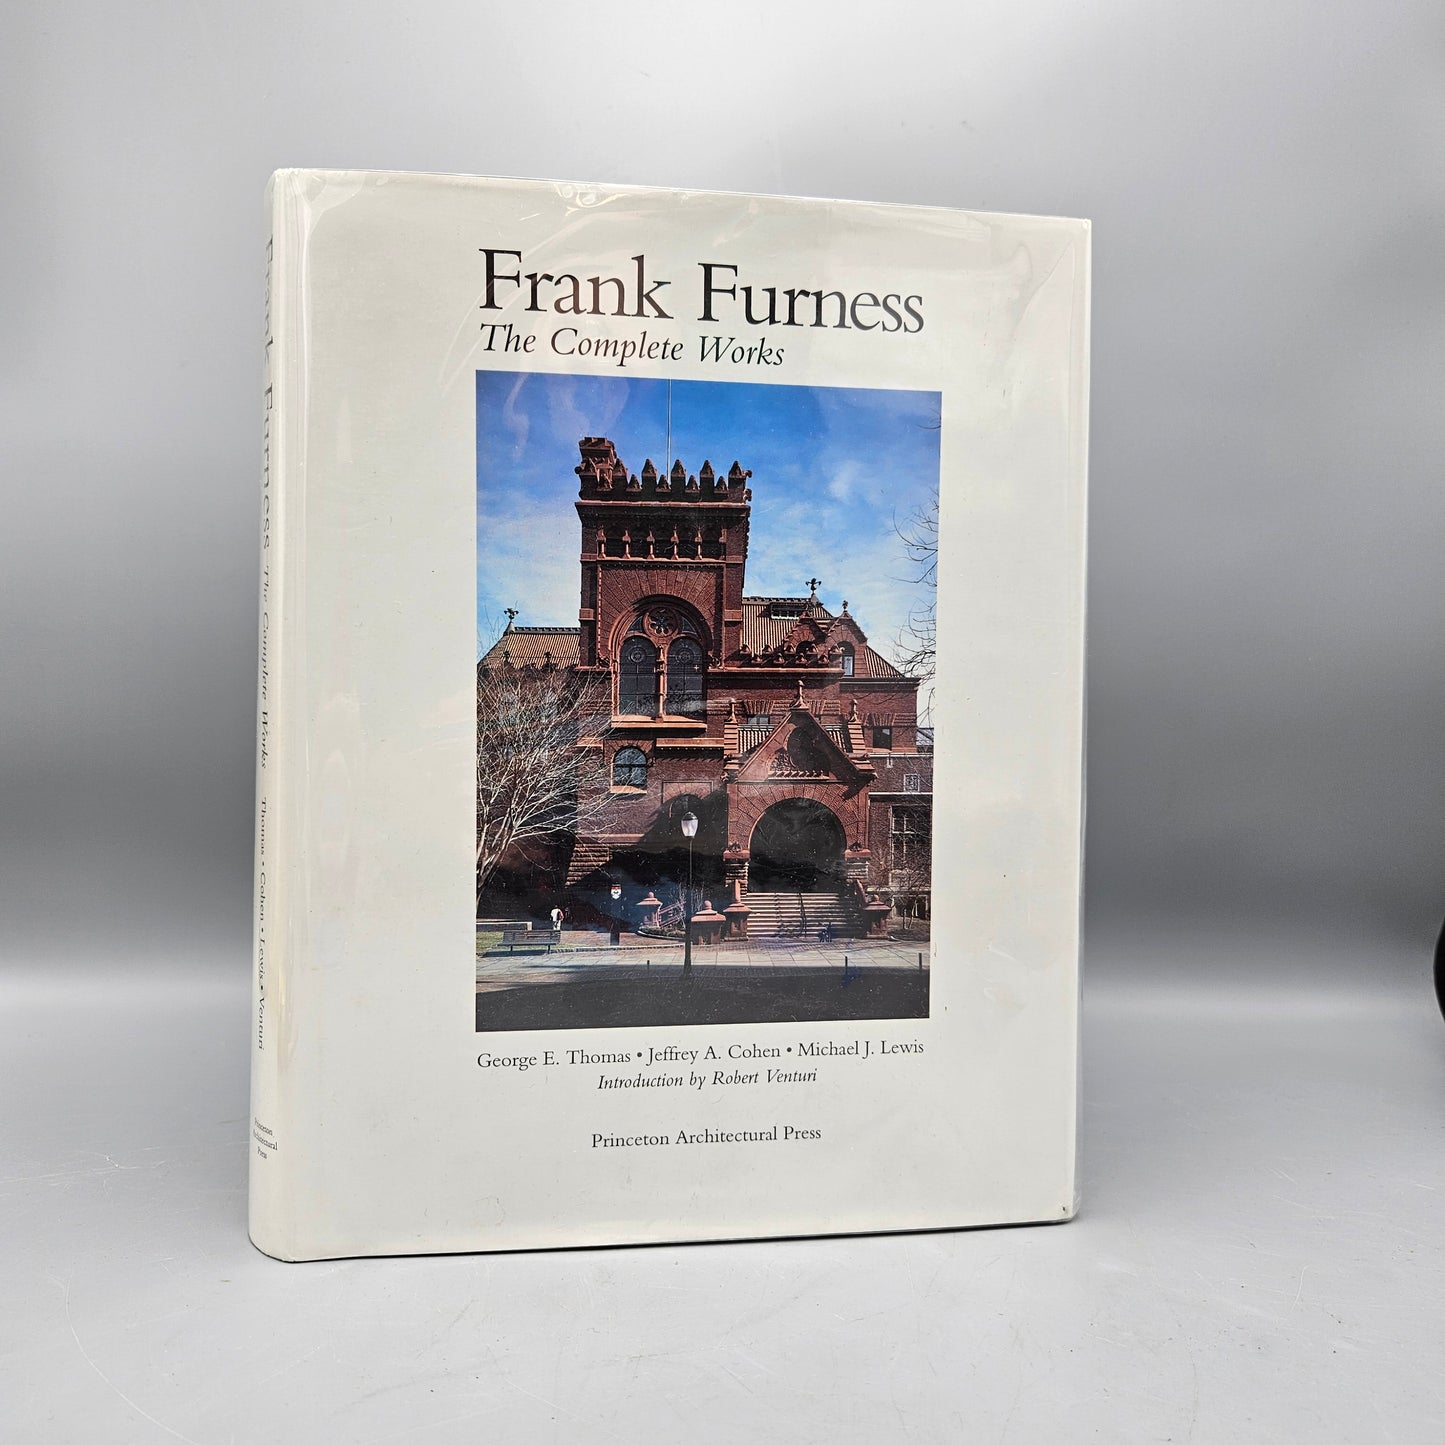 Book - George Thomas "Frank Furness The Complete Works"